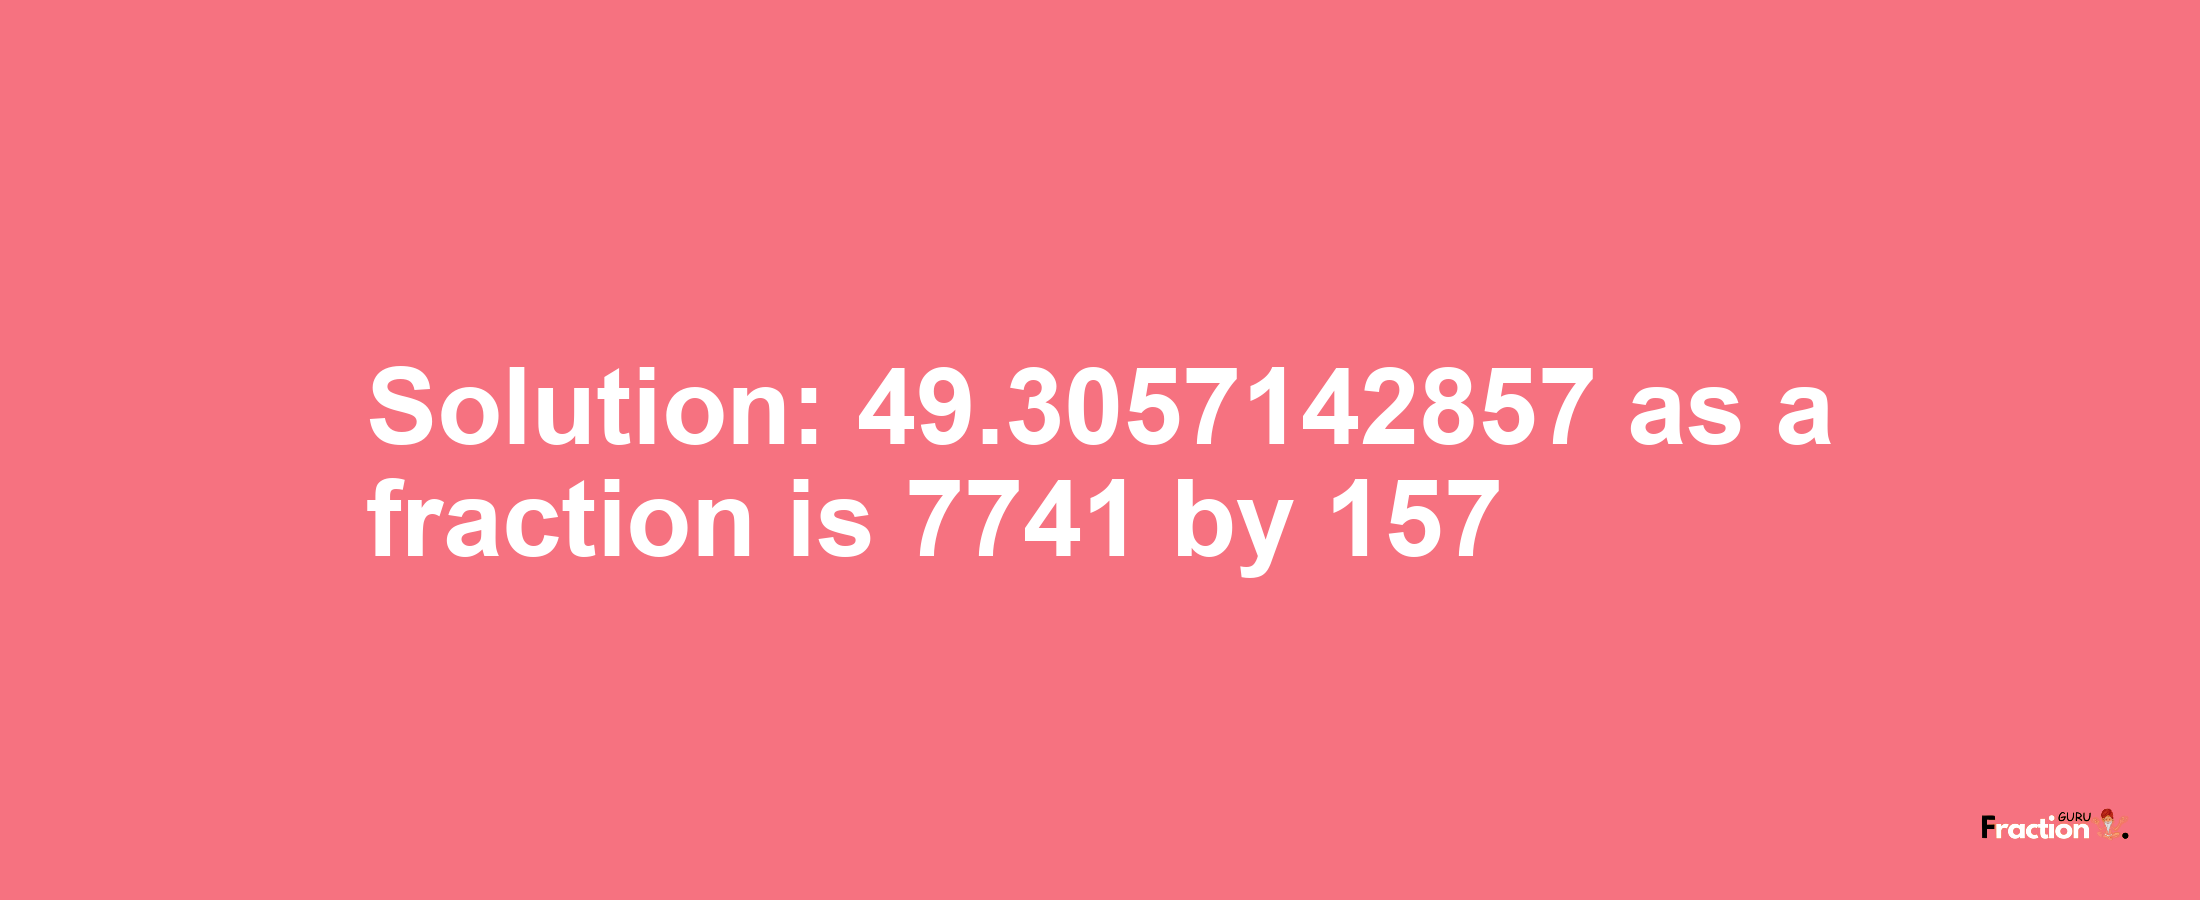 Solution:49.3057142857 as a fraction is 7741/157